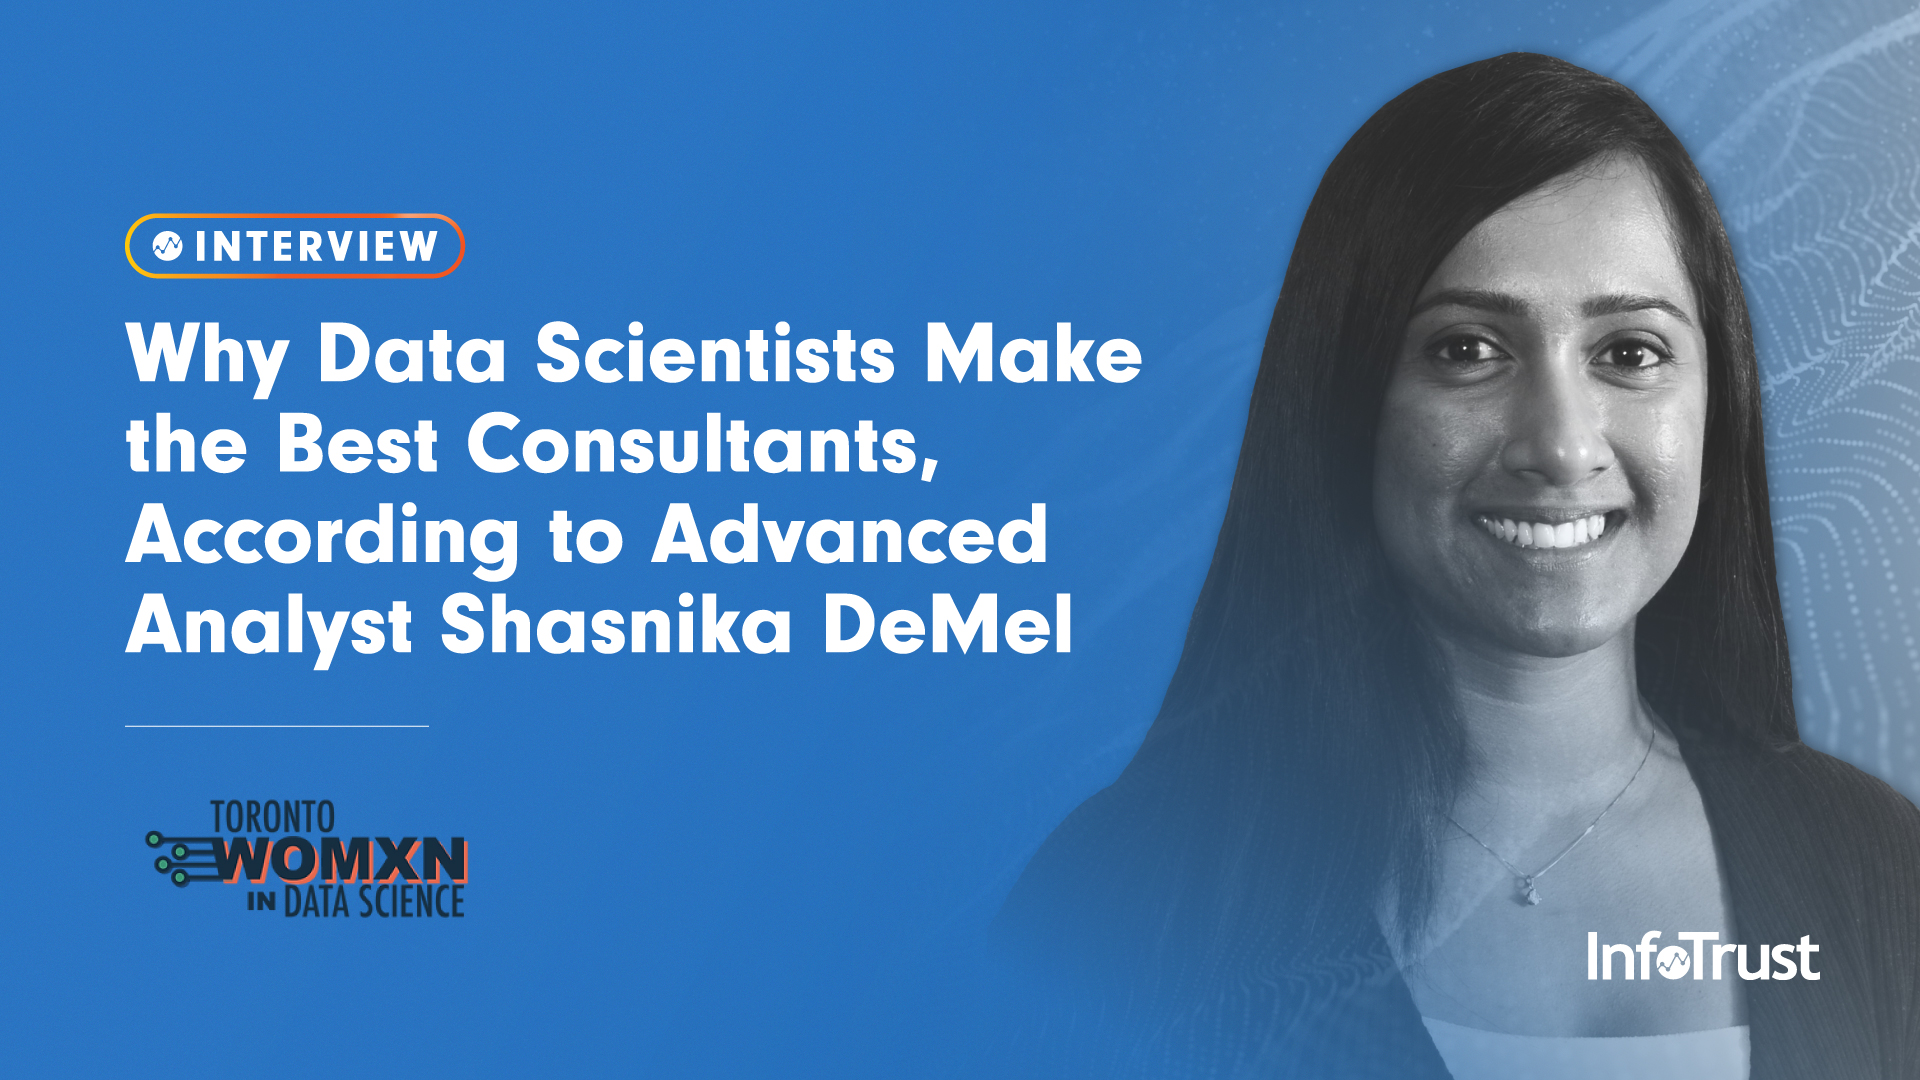 Why Data Scientists Make the Best Consultants, According to Advanced Analyst Shasnika DeMel